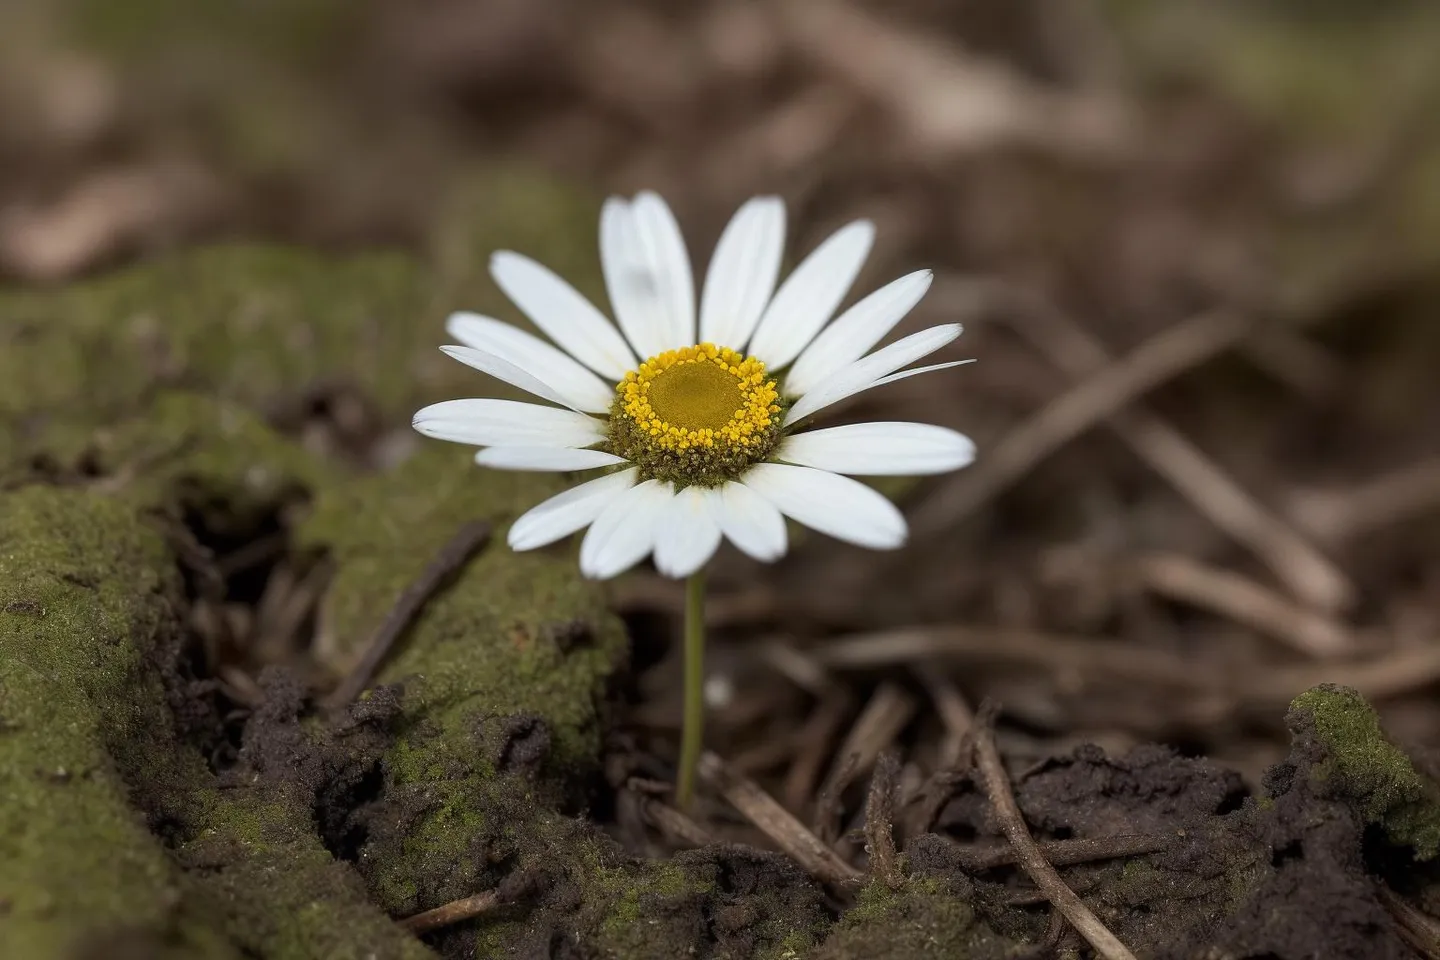 A daisy flower with white petals and a yellow center growing on moss-covered ground.